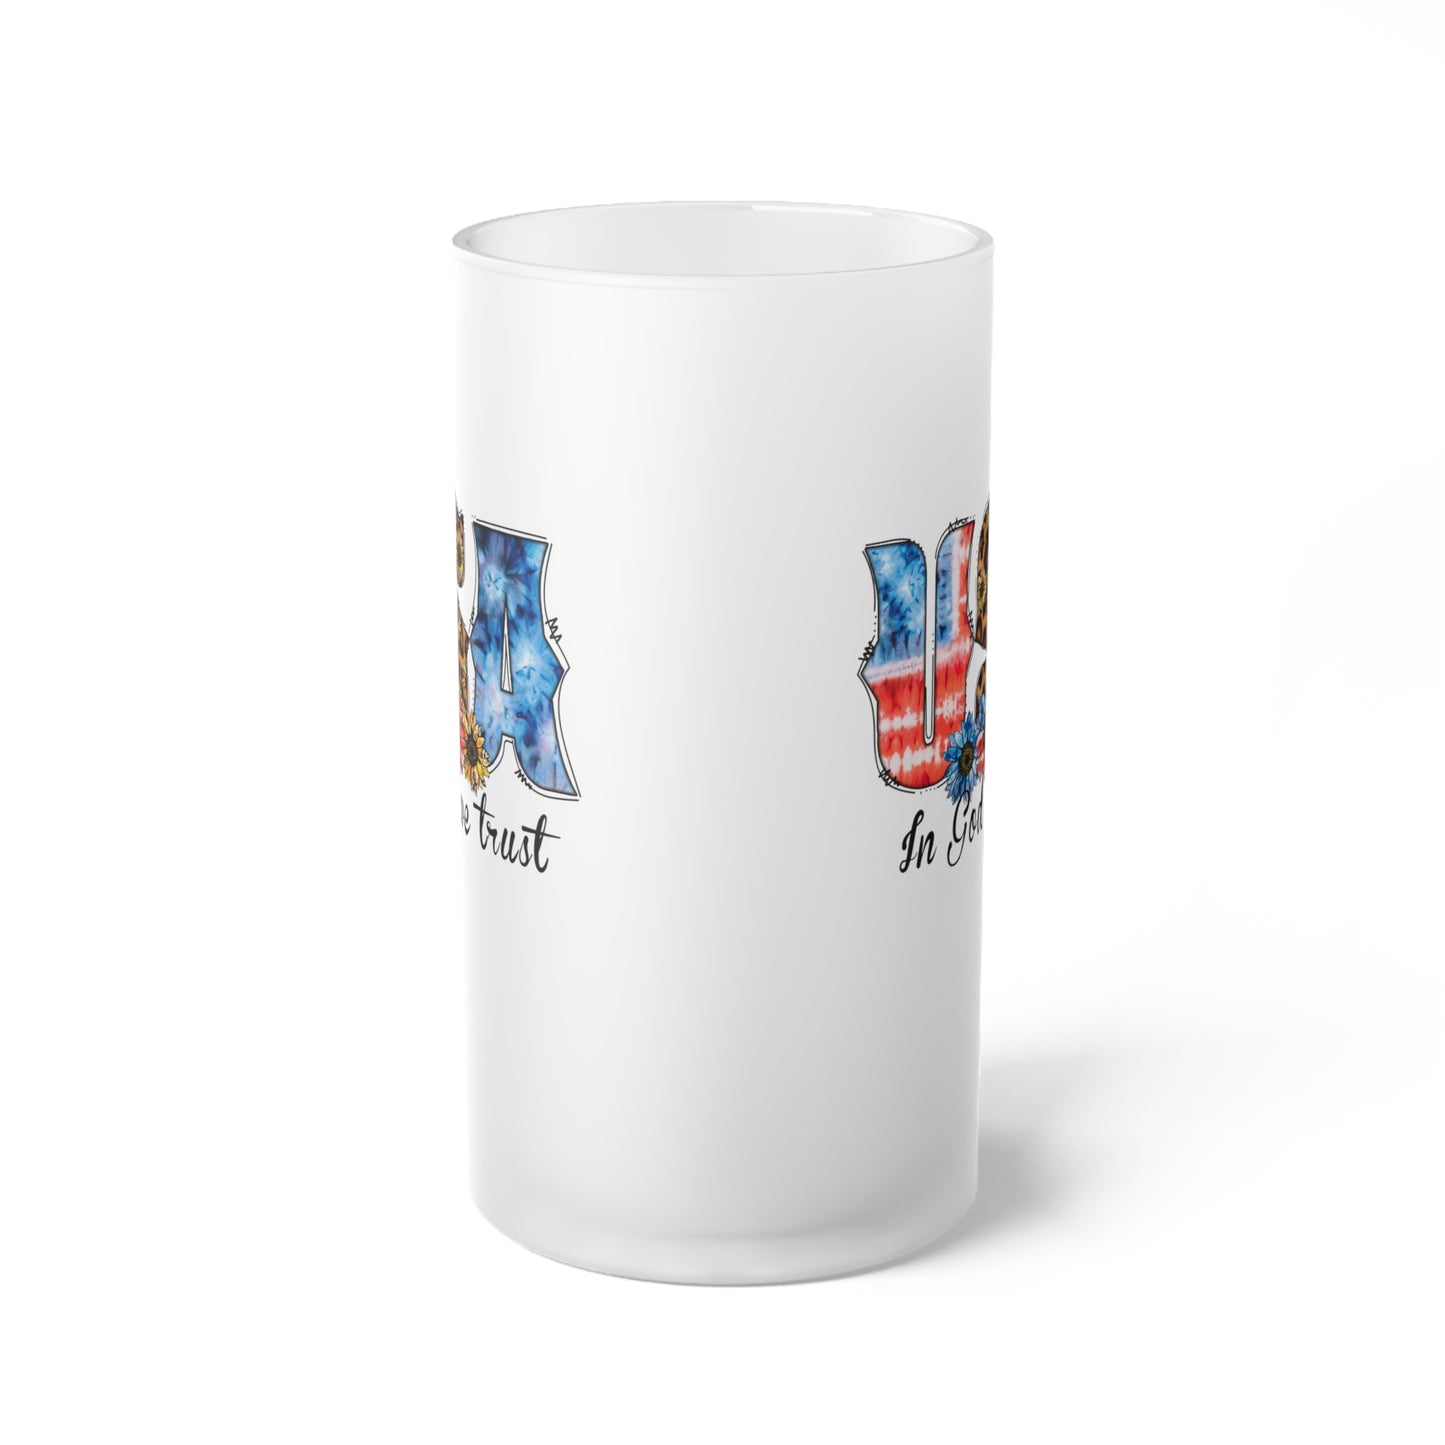 USA In God We Trust Frosted Glass Beer Mug